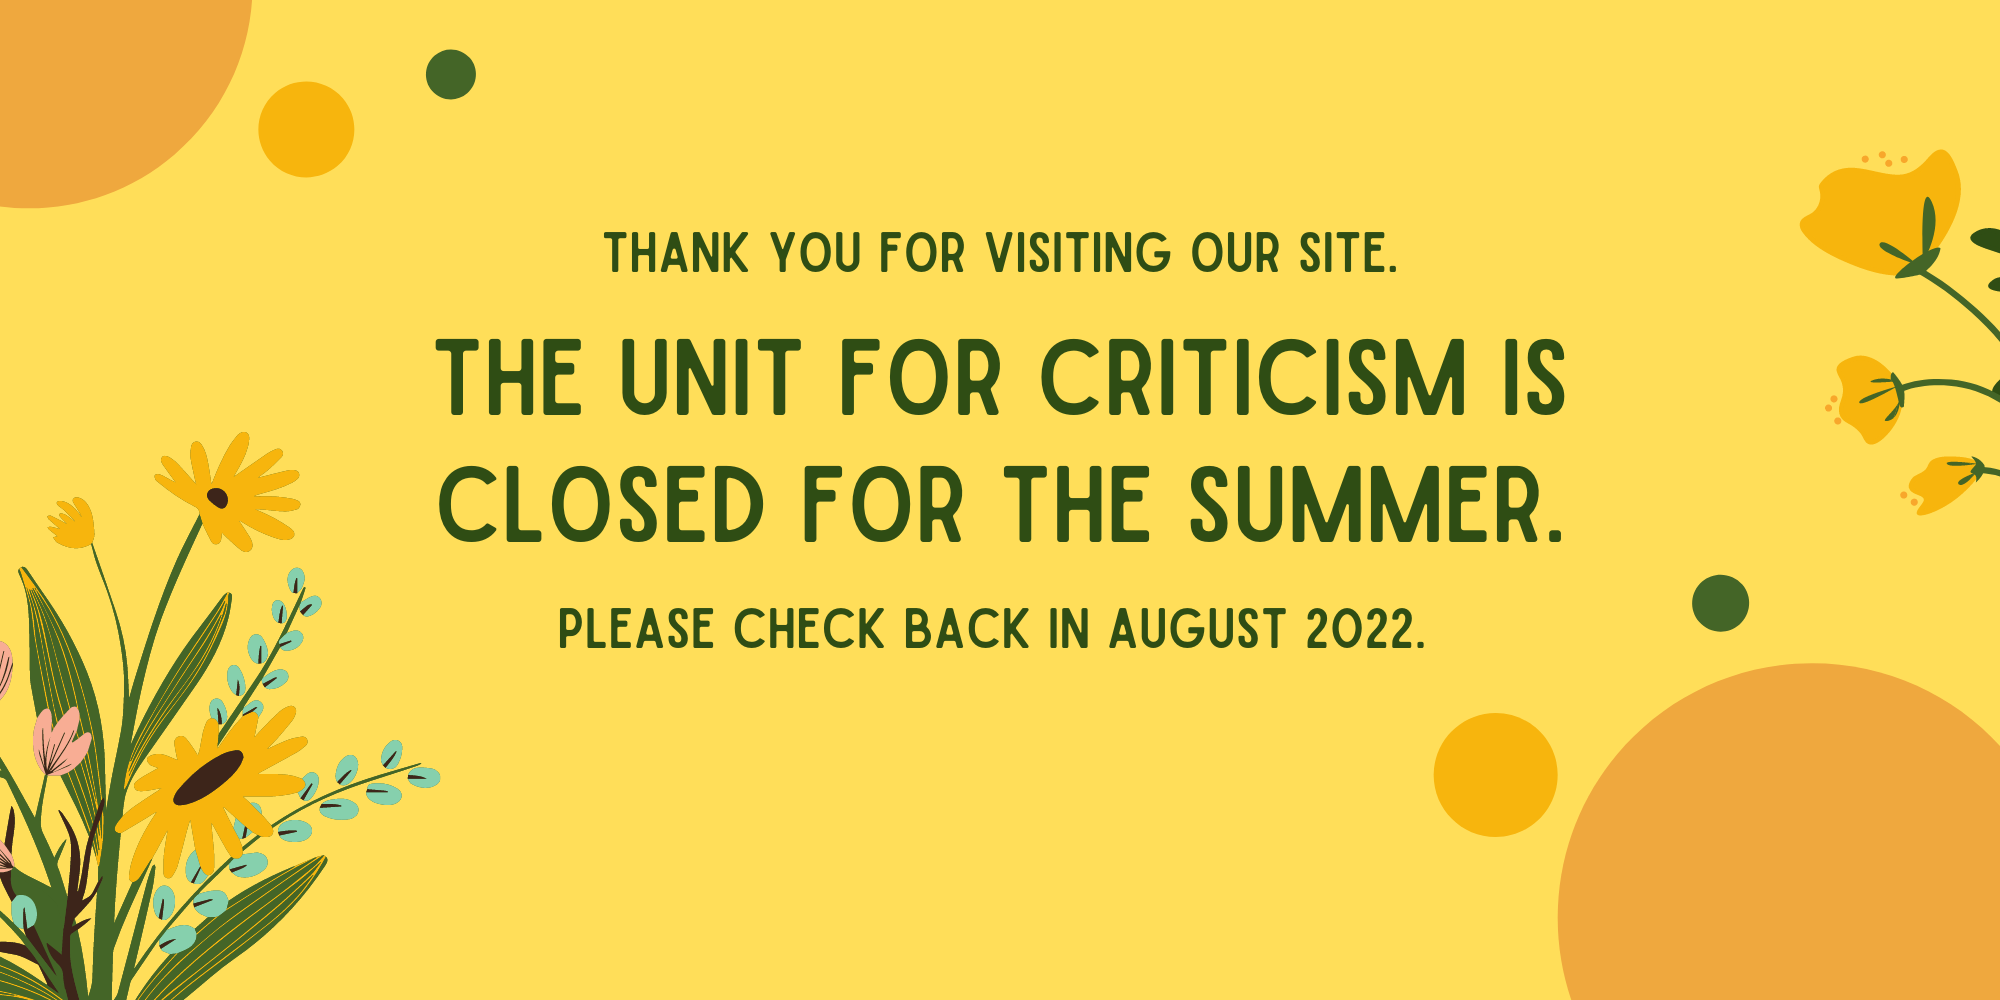 The Unit for Criticism is closed for the summer. Please check back in August 2022.